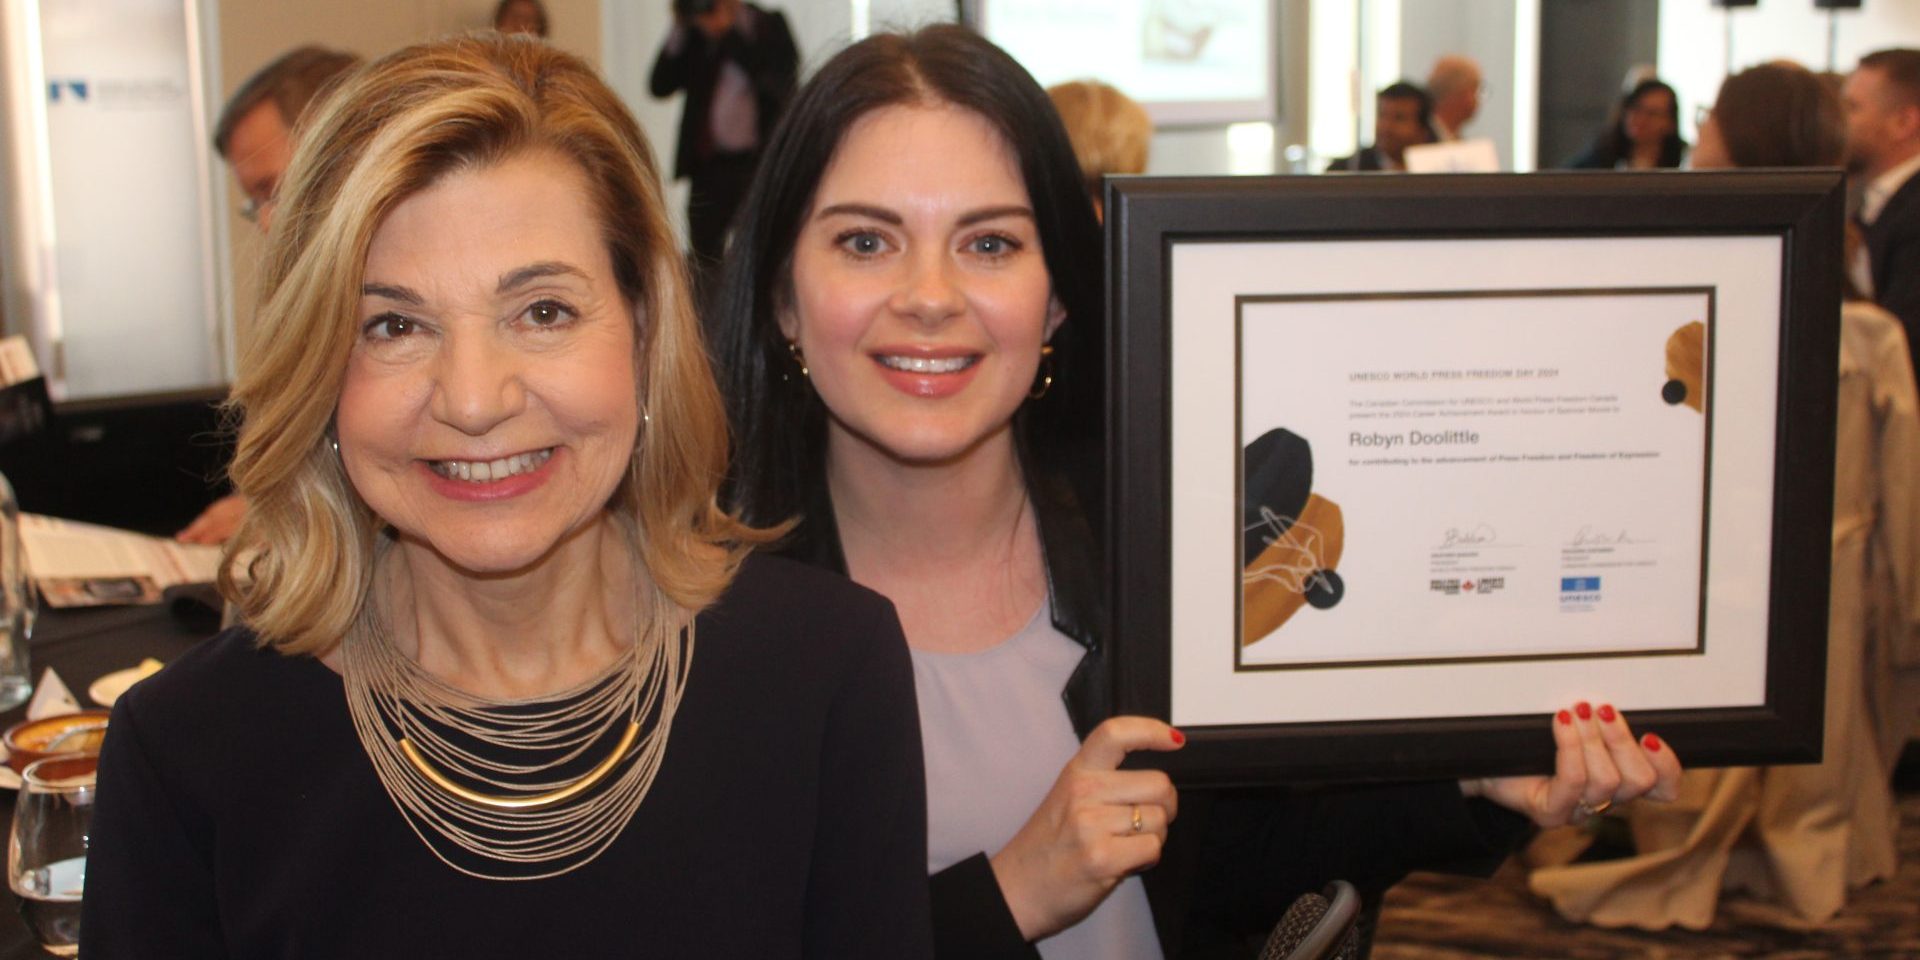 Margaret Sullivan, left, The Guardian U.S. columnist, and The Globe and Mail’s Robyn Doolittle, winner of this year’s World Press Freedom Canada career achievement award, at the WPFC awards luncheon on May 1 at the National Arts Centre.